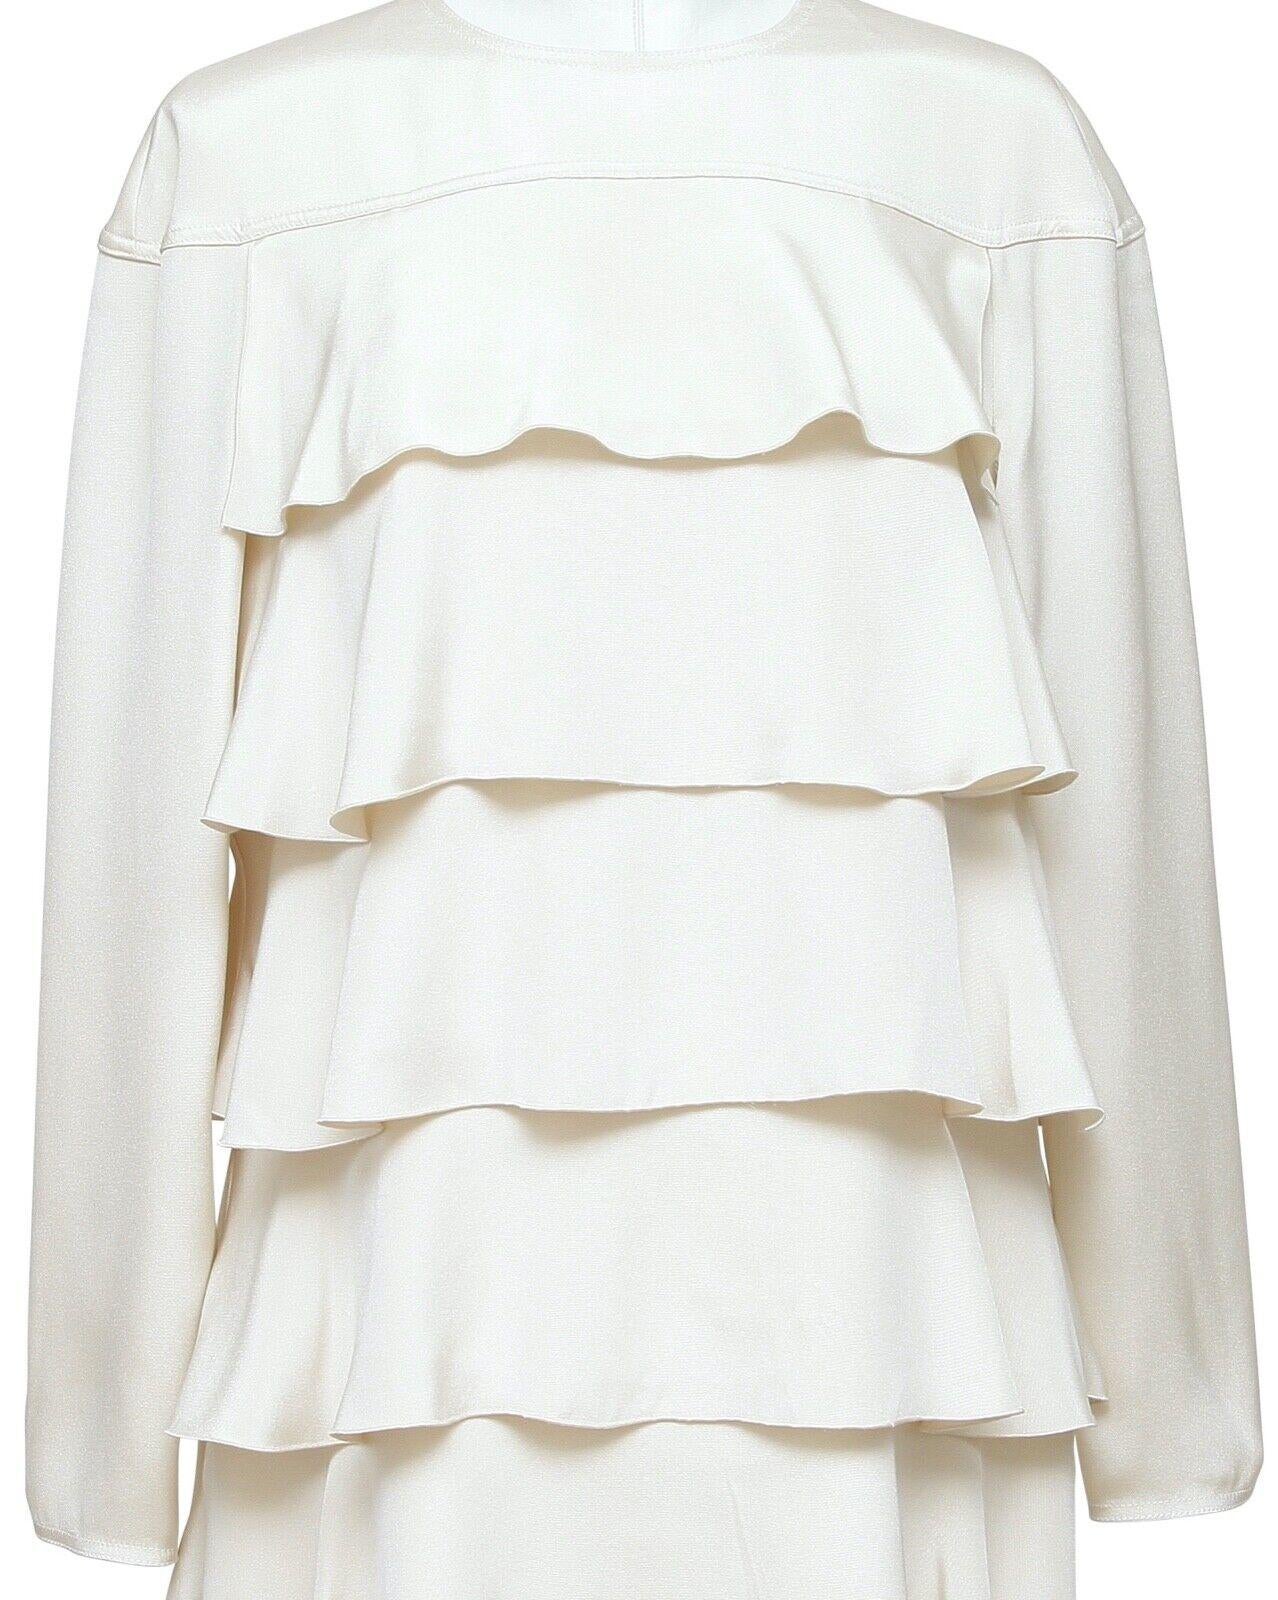 VALENTINO Ivory Dress Long Sleeve Knee Length Silk Tiered Crew Neck Sz 6 For Sale 1